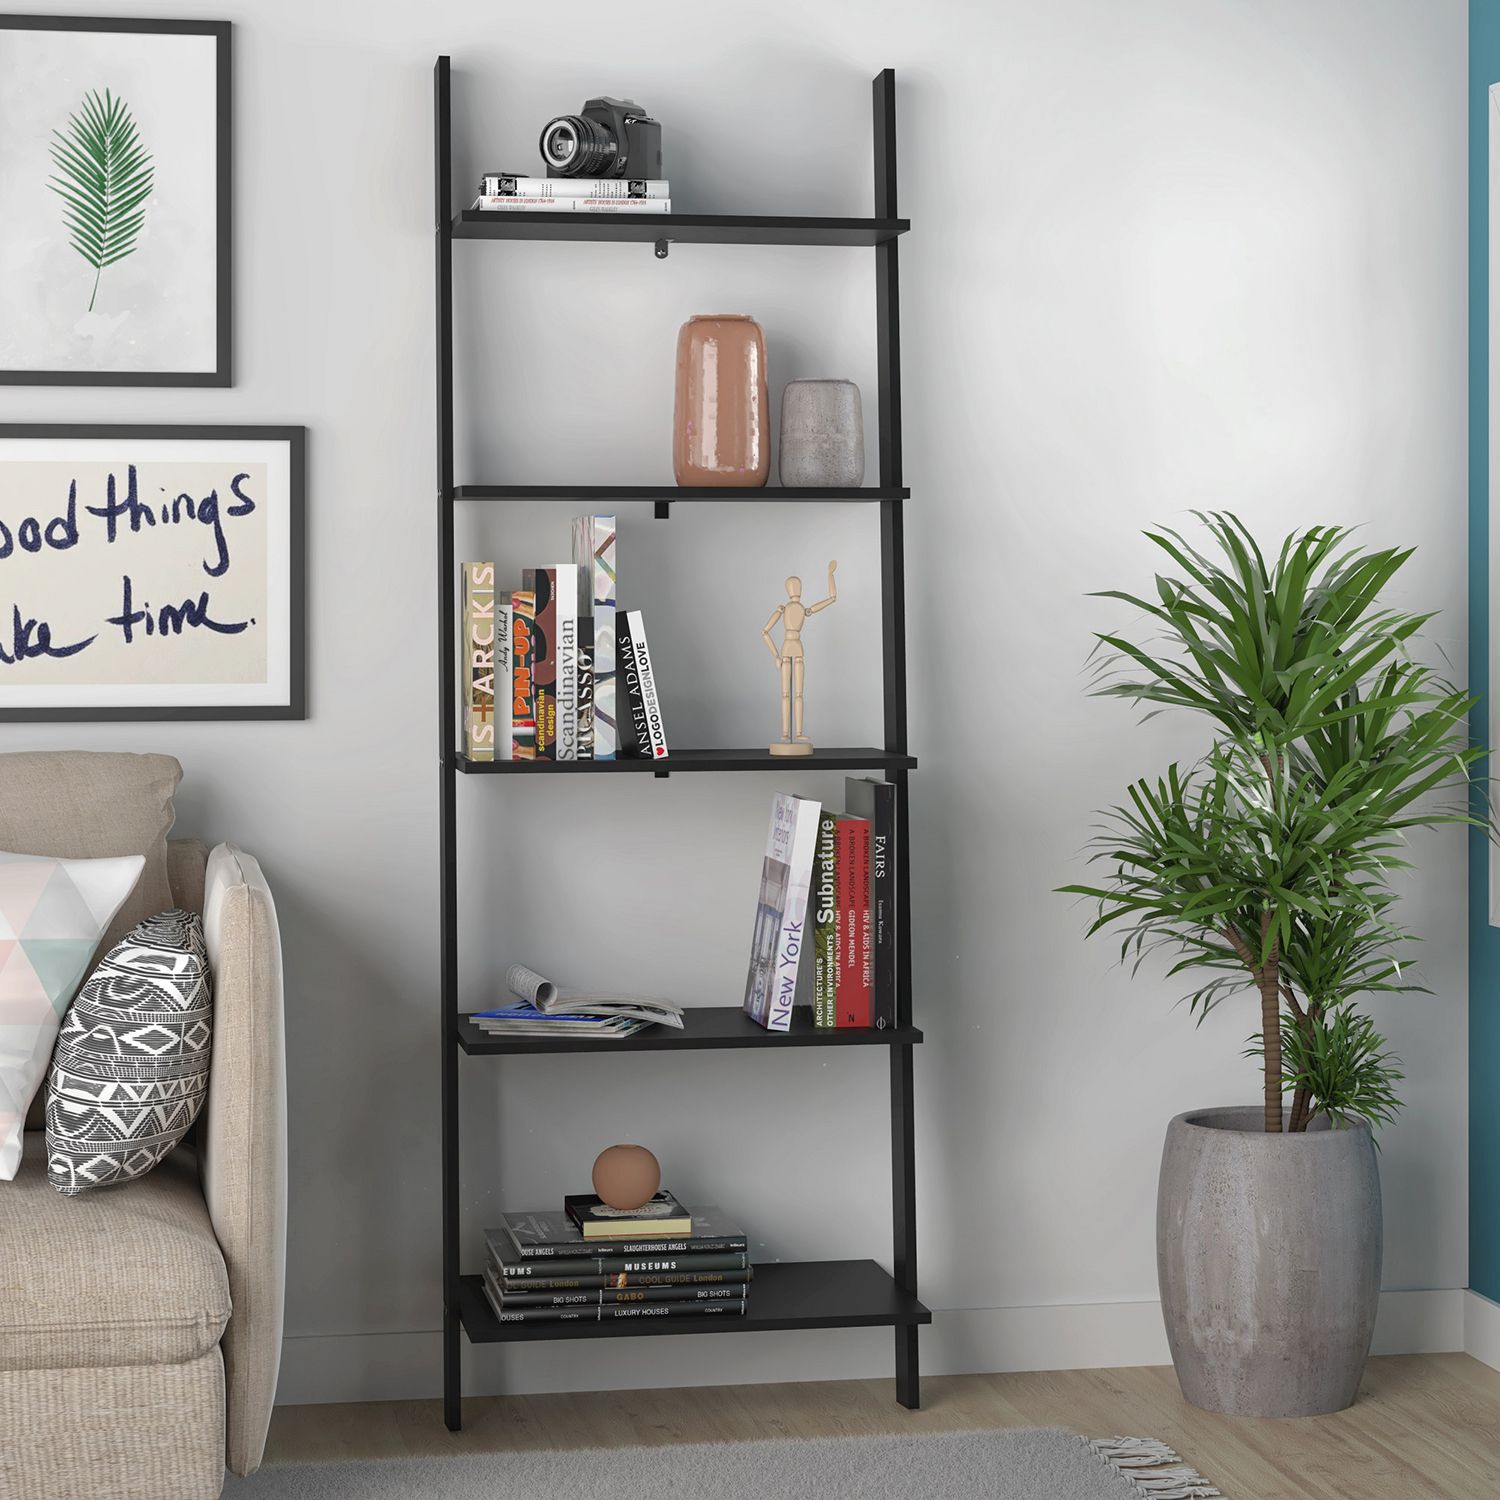 How to Create an At-Home Library